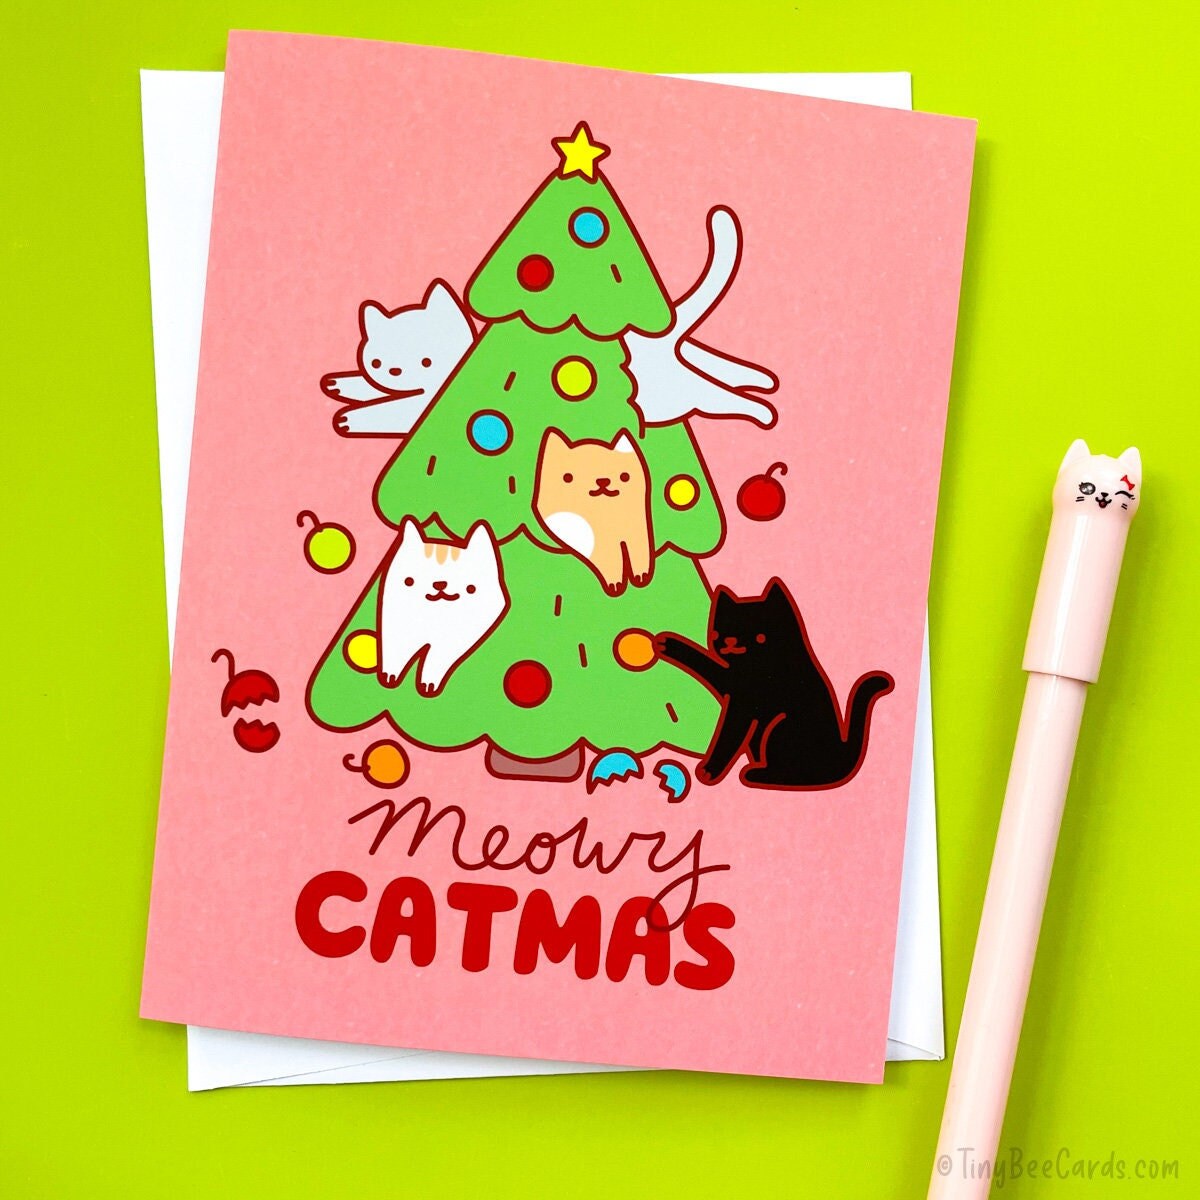 funny christmas card photo ideas with cats